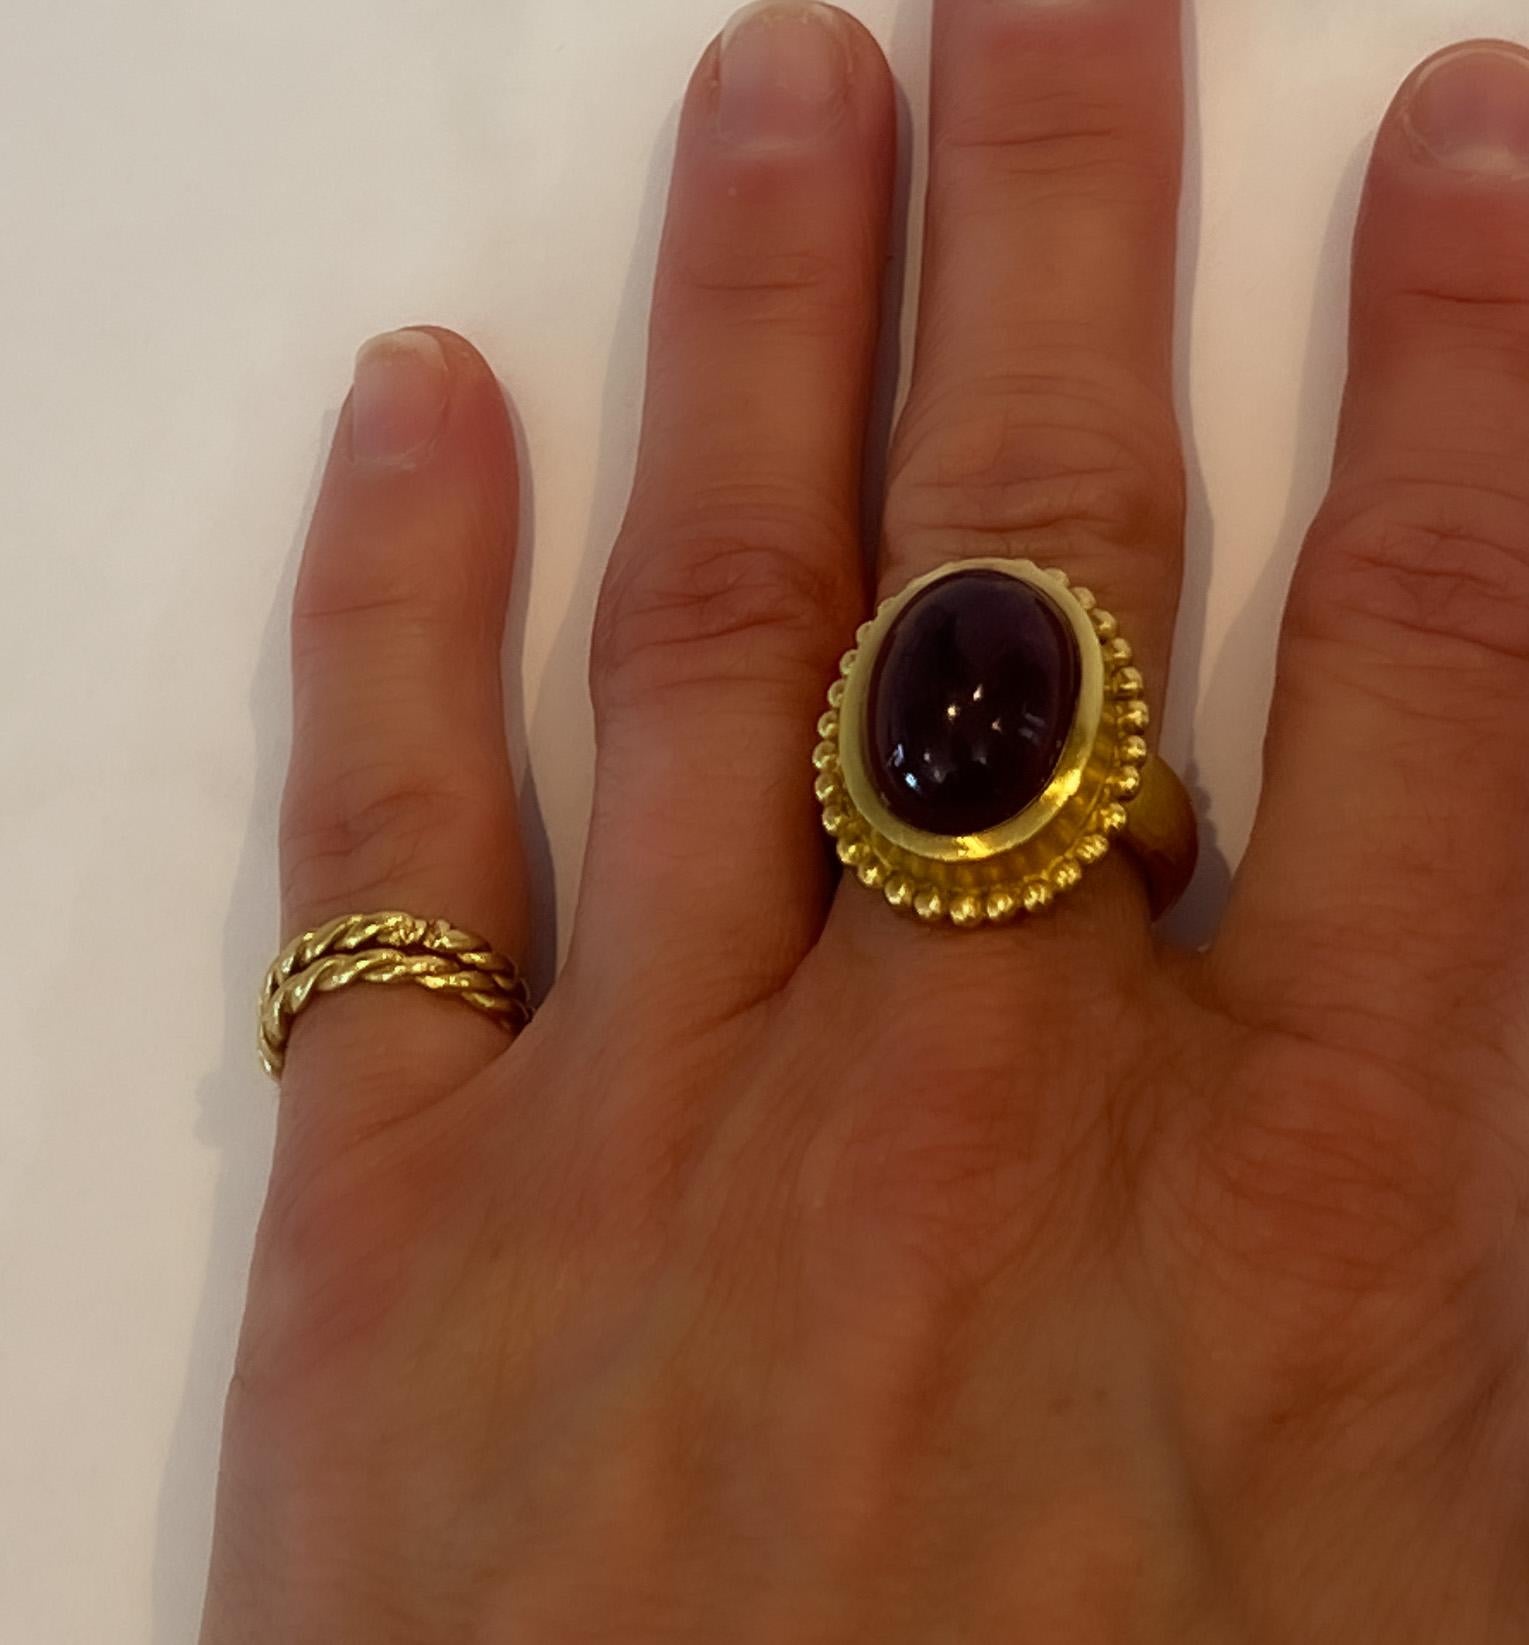 Stunning Red Tourmaline Cocktail Ring, is set in 22k gold using the ancient technique of granulation.  Bringing an old world feel with a modern twist. Hand made, one of a kind stunner. 

The Tagili Promise: With every Ring sold, a portion of the